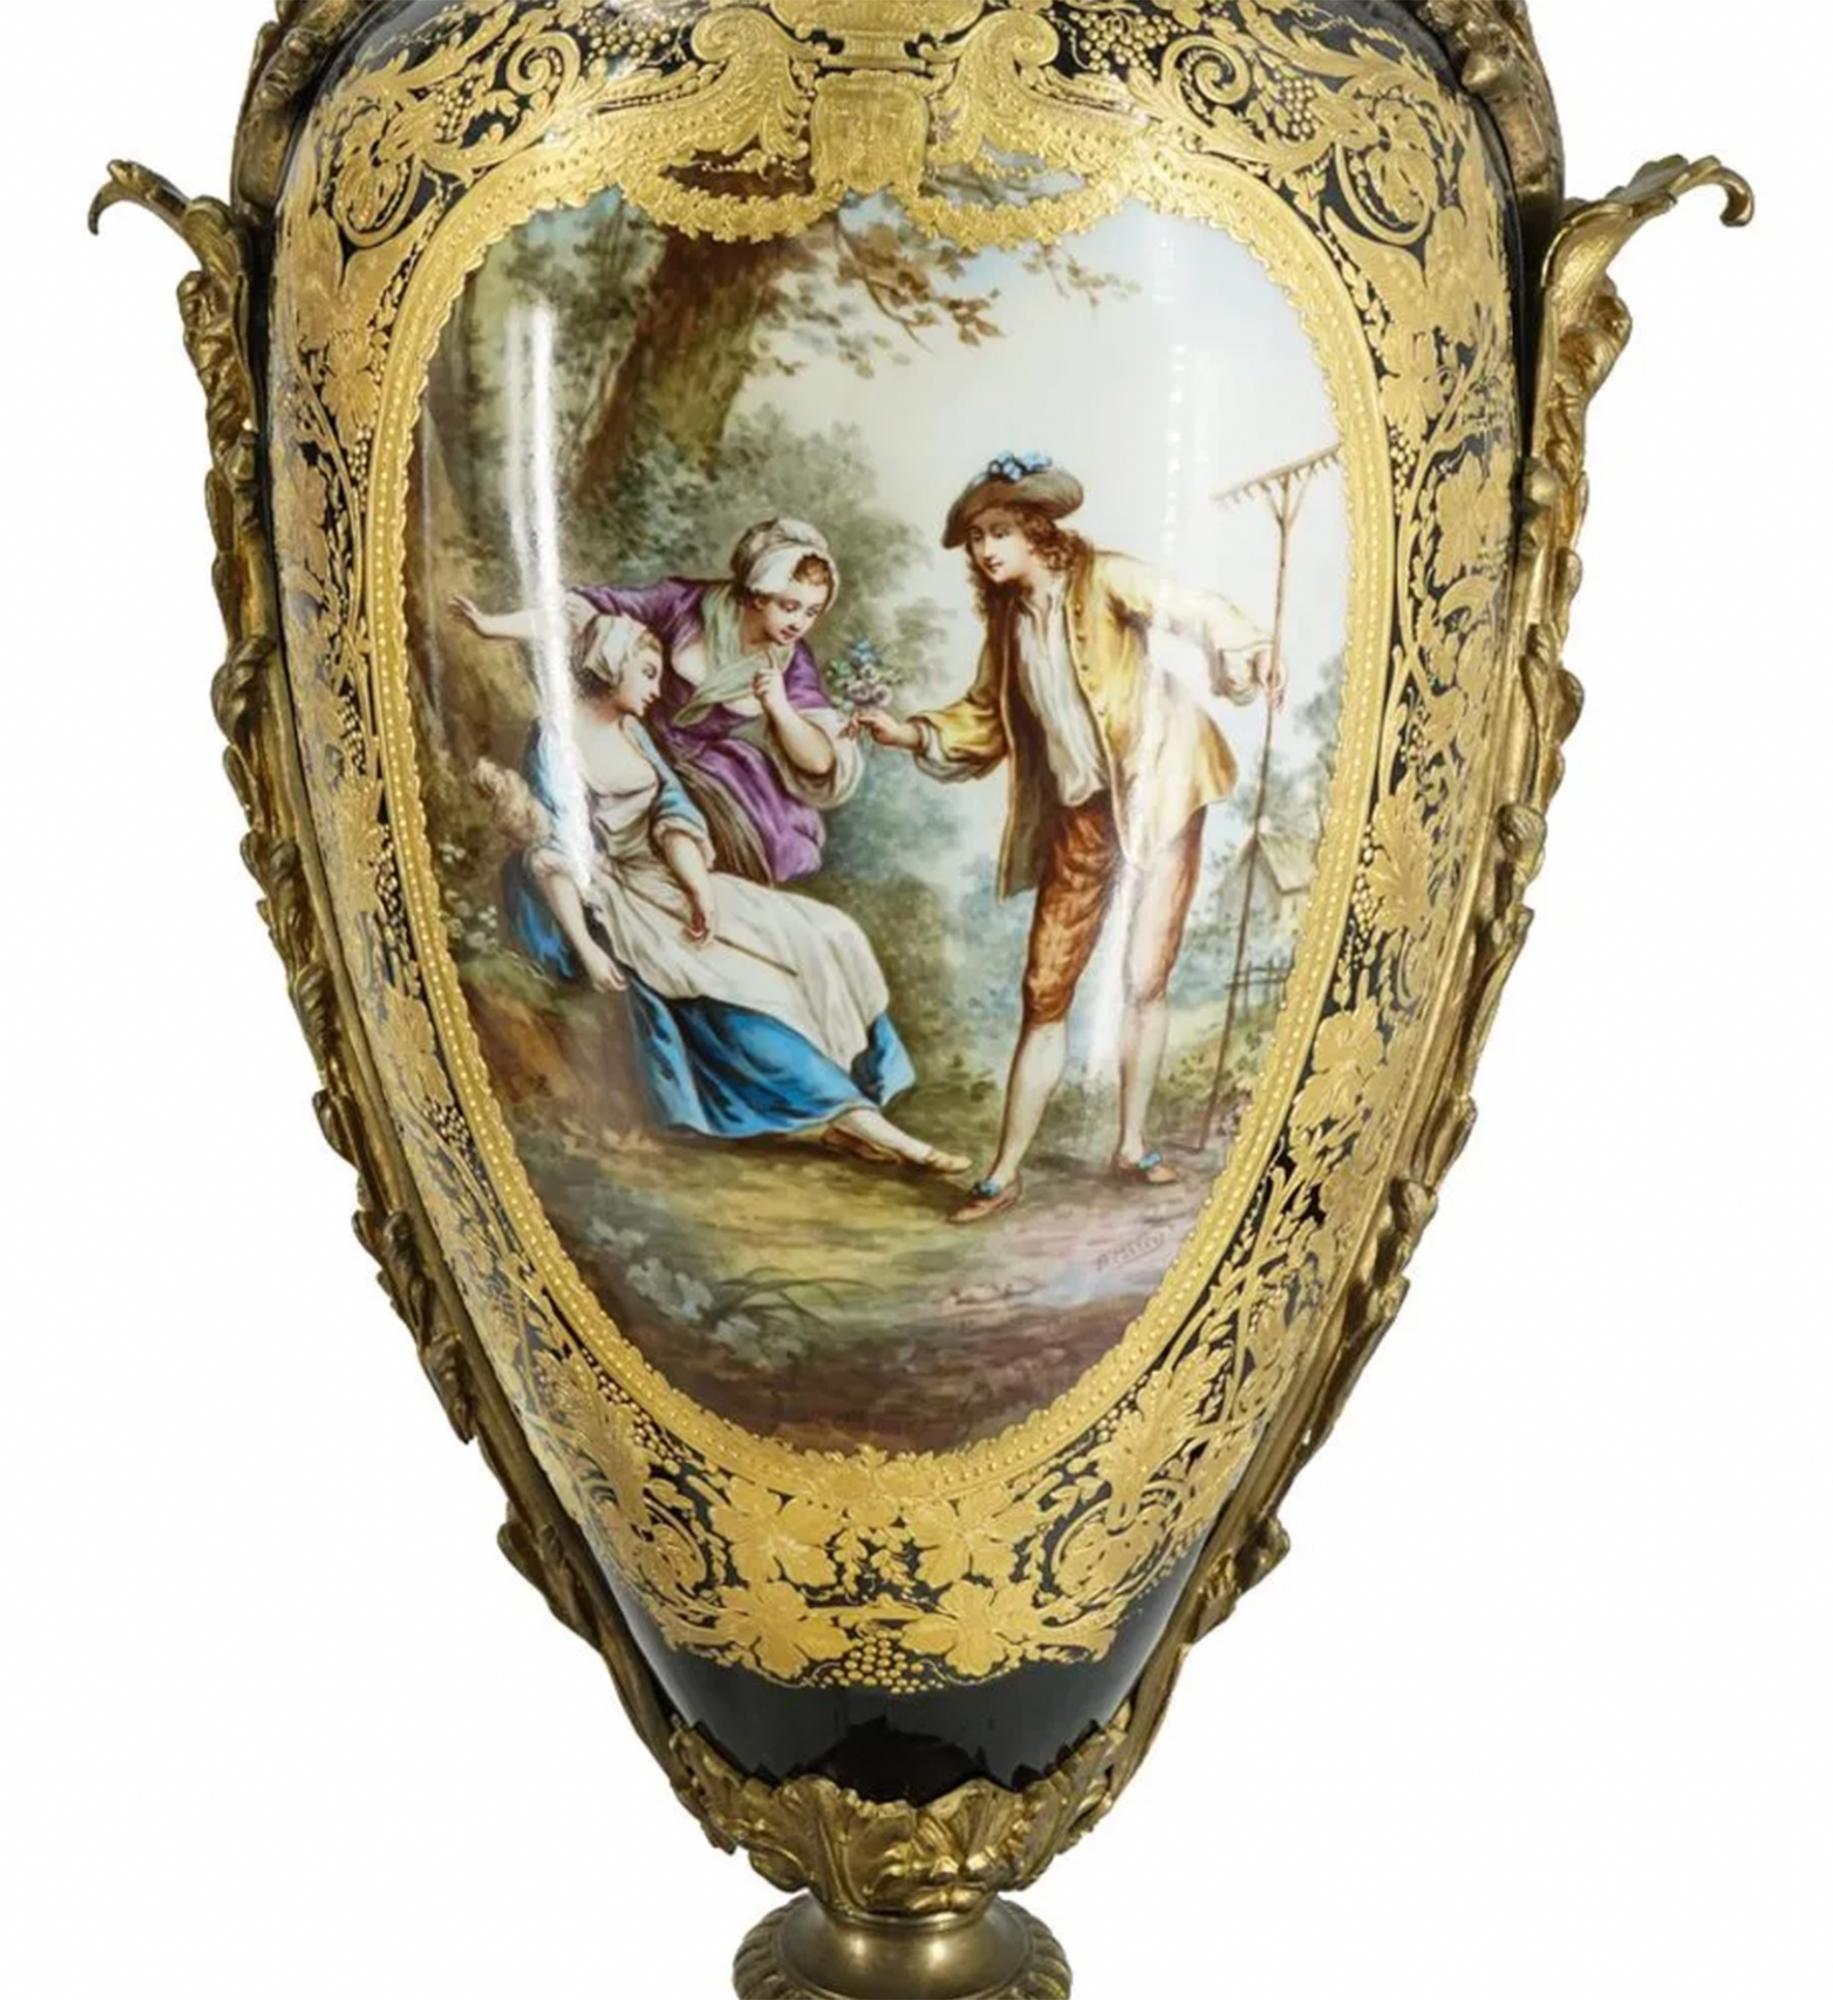 important Pair of Sevres porcelain urns, each featuring a porcelain body and foot mounted on a gilt bronze base and adorned with gilt bronze, foliage form trimmings and handles. Each piece bears an image on either side of its body depicting a scene